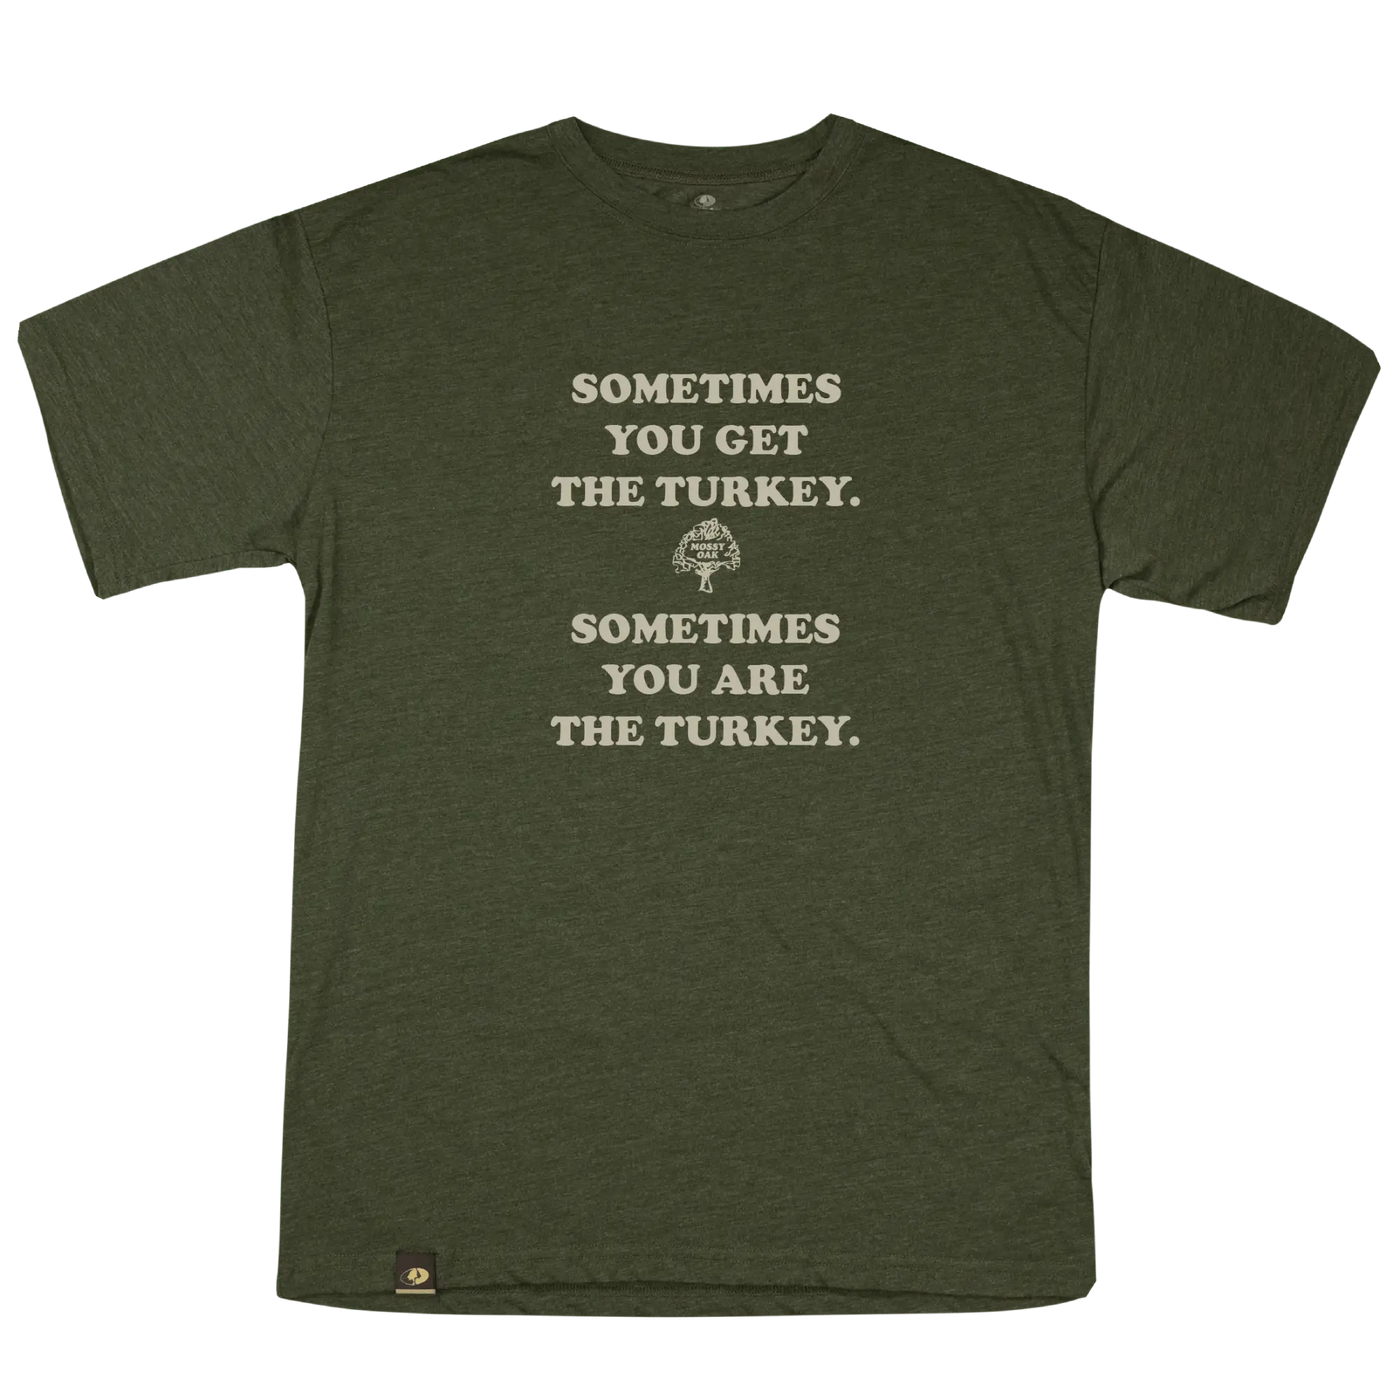 Mossy Oak Sometimes you get the turkey Sometimes you are the turkey tee 